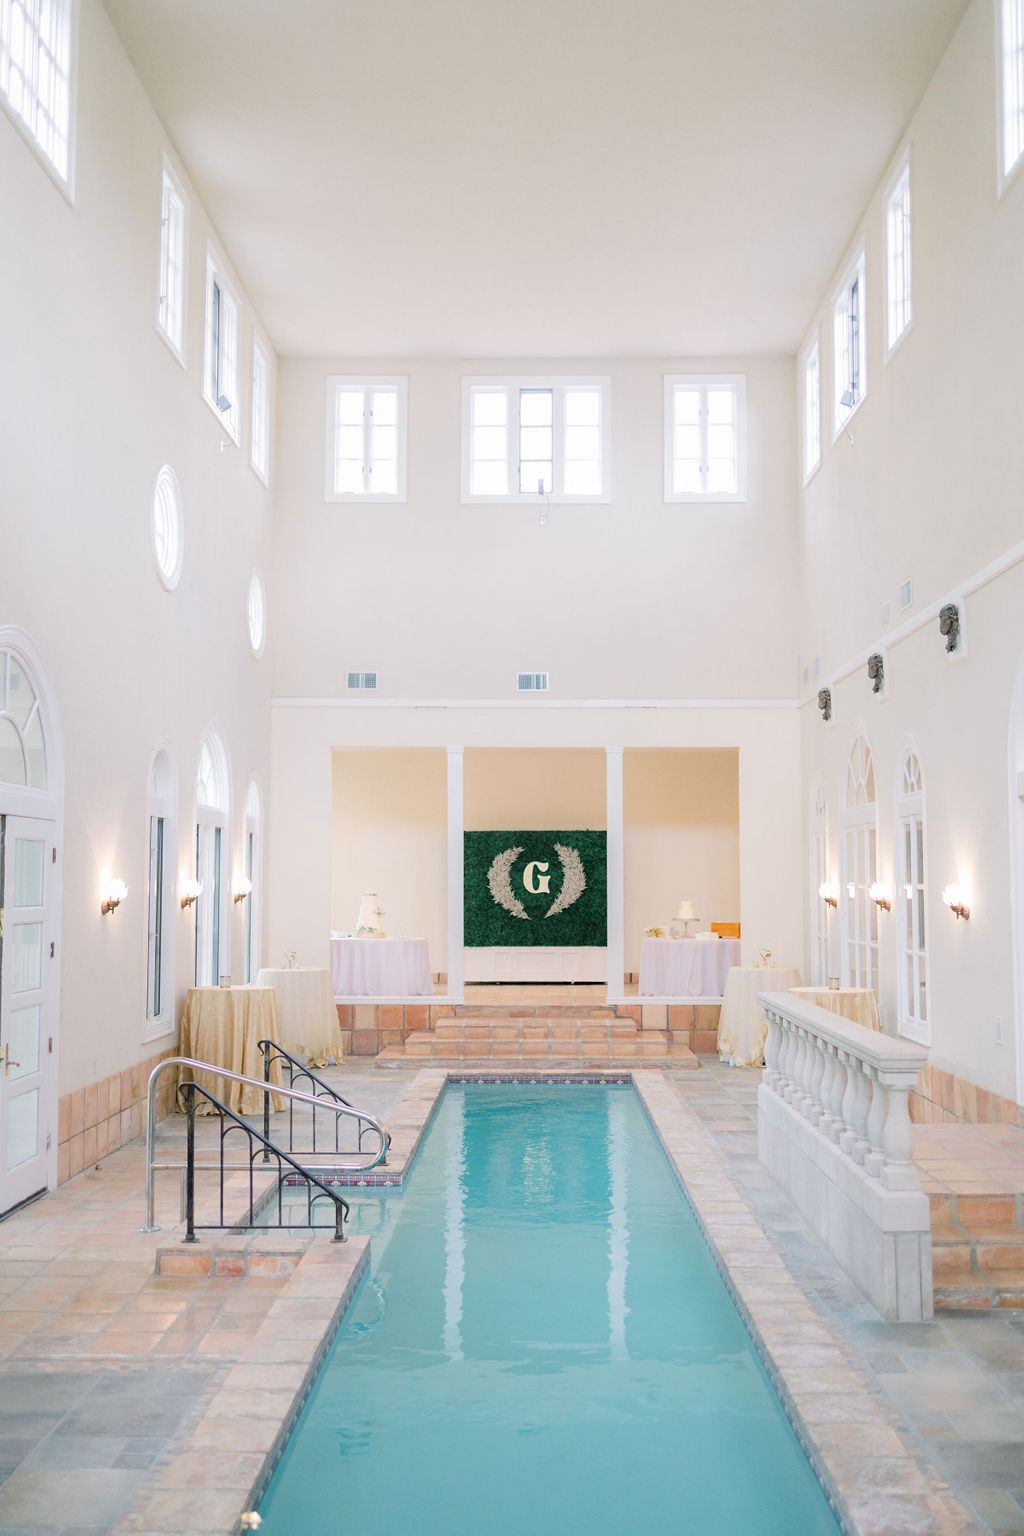 Large indoor pool with Italian style architecture.